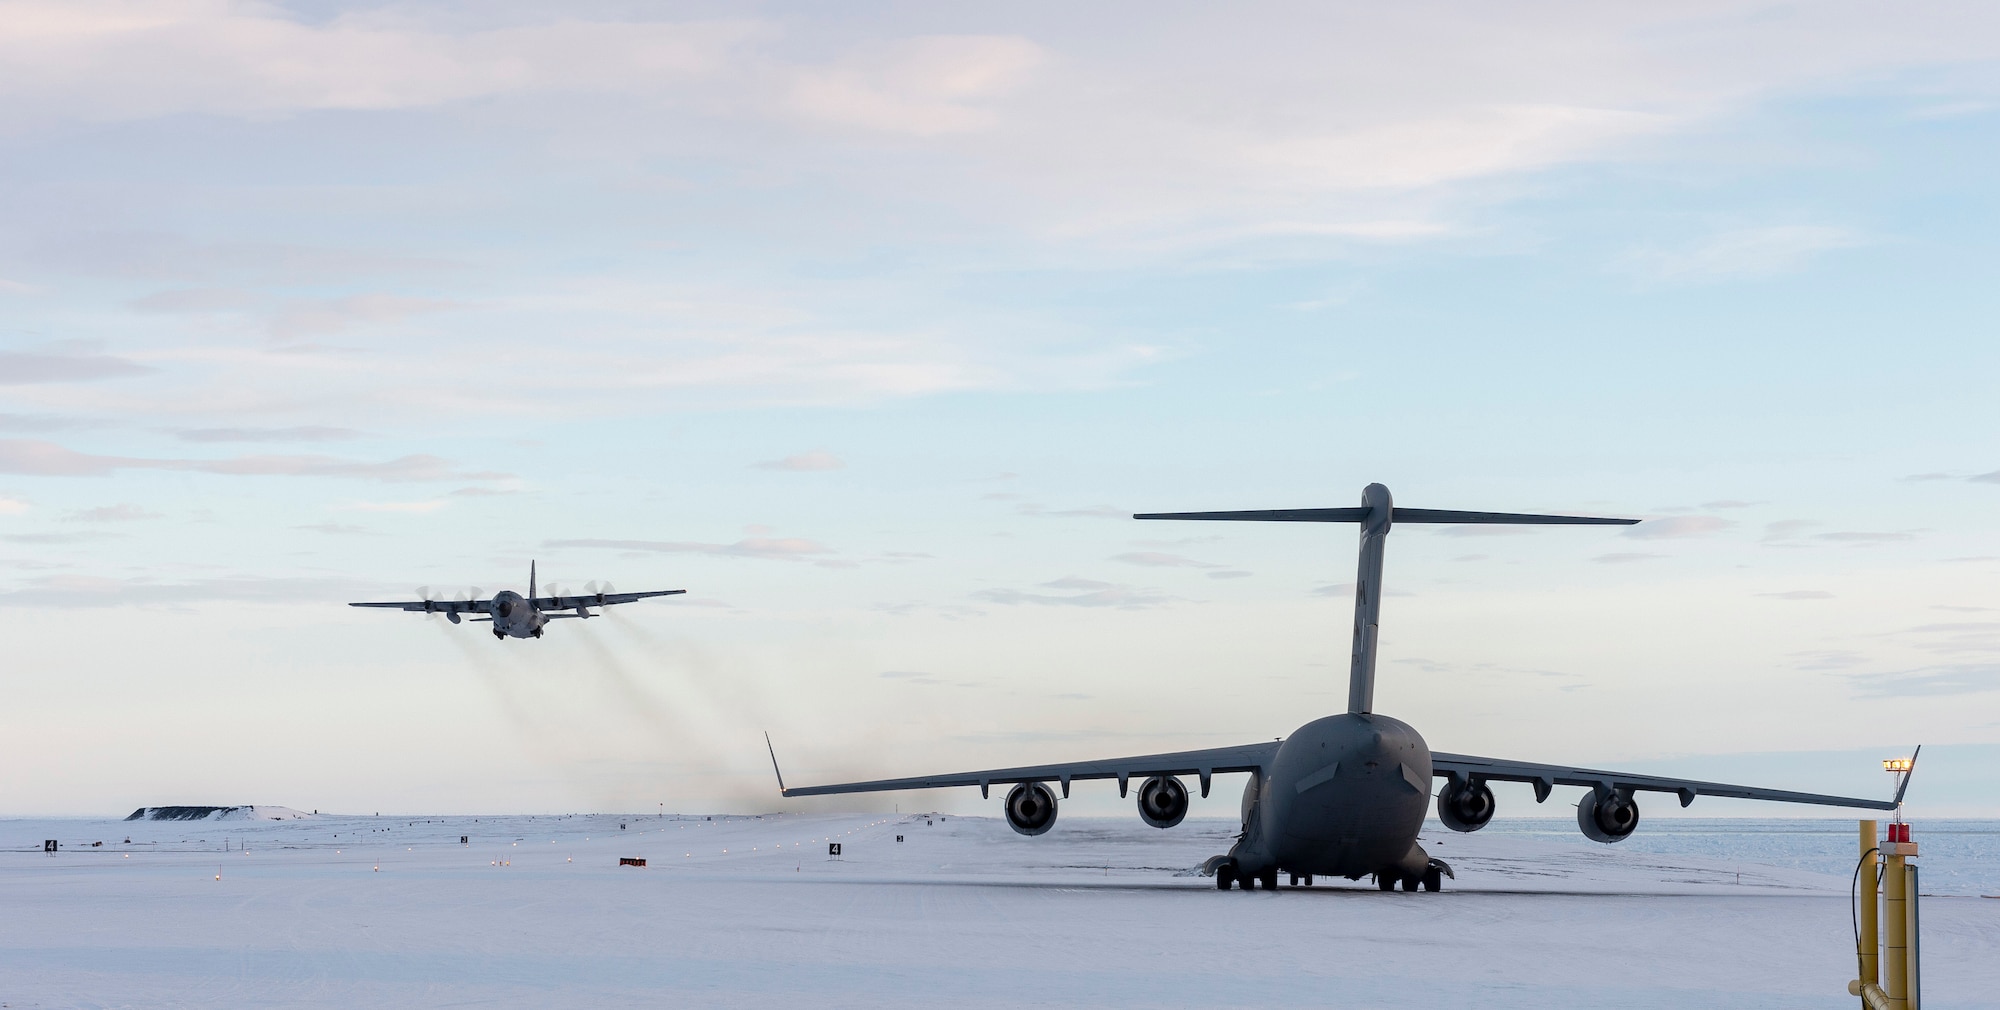 A C-130 flown by Airmen from the New York Air National Guard's 109th Airlift Wing takes off from Canadian Forces Station Alert on Ellsmere Island, Nunavut, after dropping off supplies on Sept. 30, 2019. The Air Guard crew assisted members of the Royal Canadian Air Force's  8 Wing in transporting supplies from Thule Air Base, Greenland to Canadian Forces Station Alert, Nunavut. (Courtesy Photo)